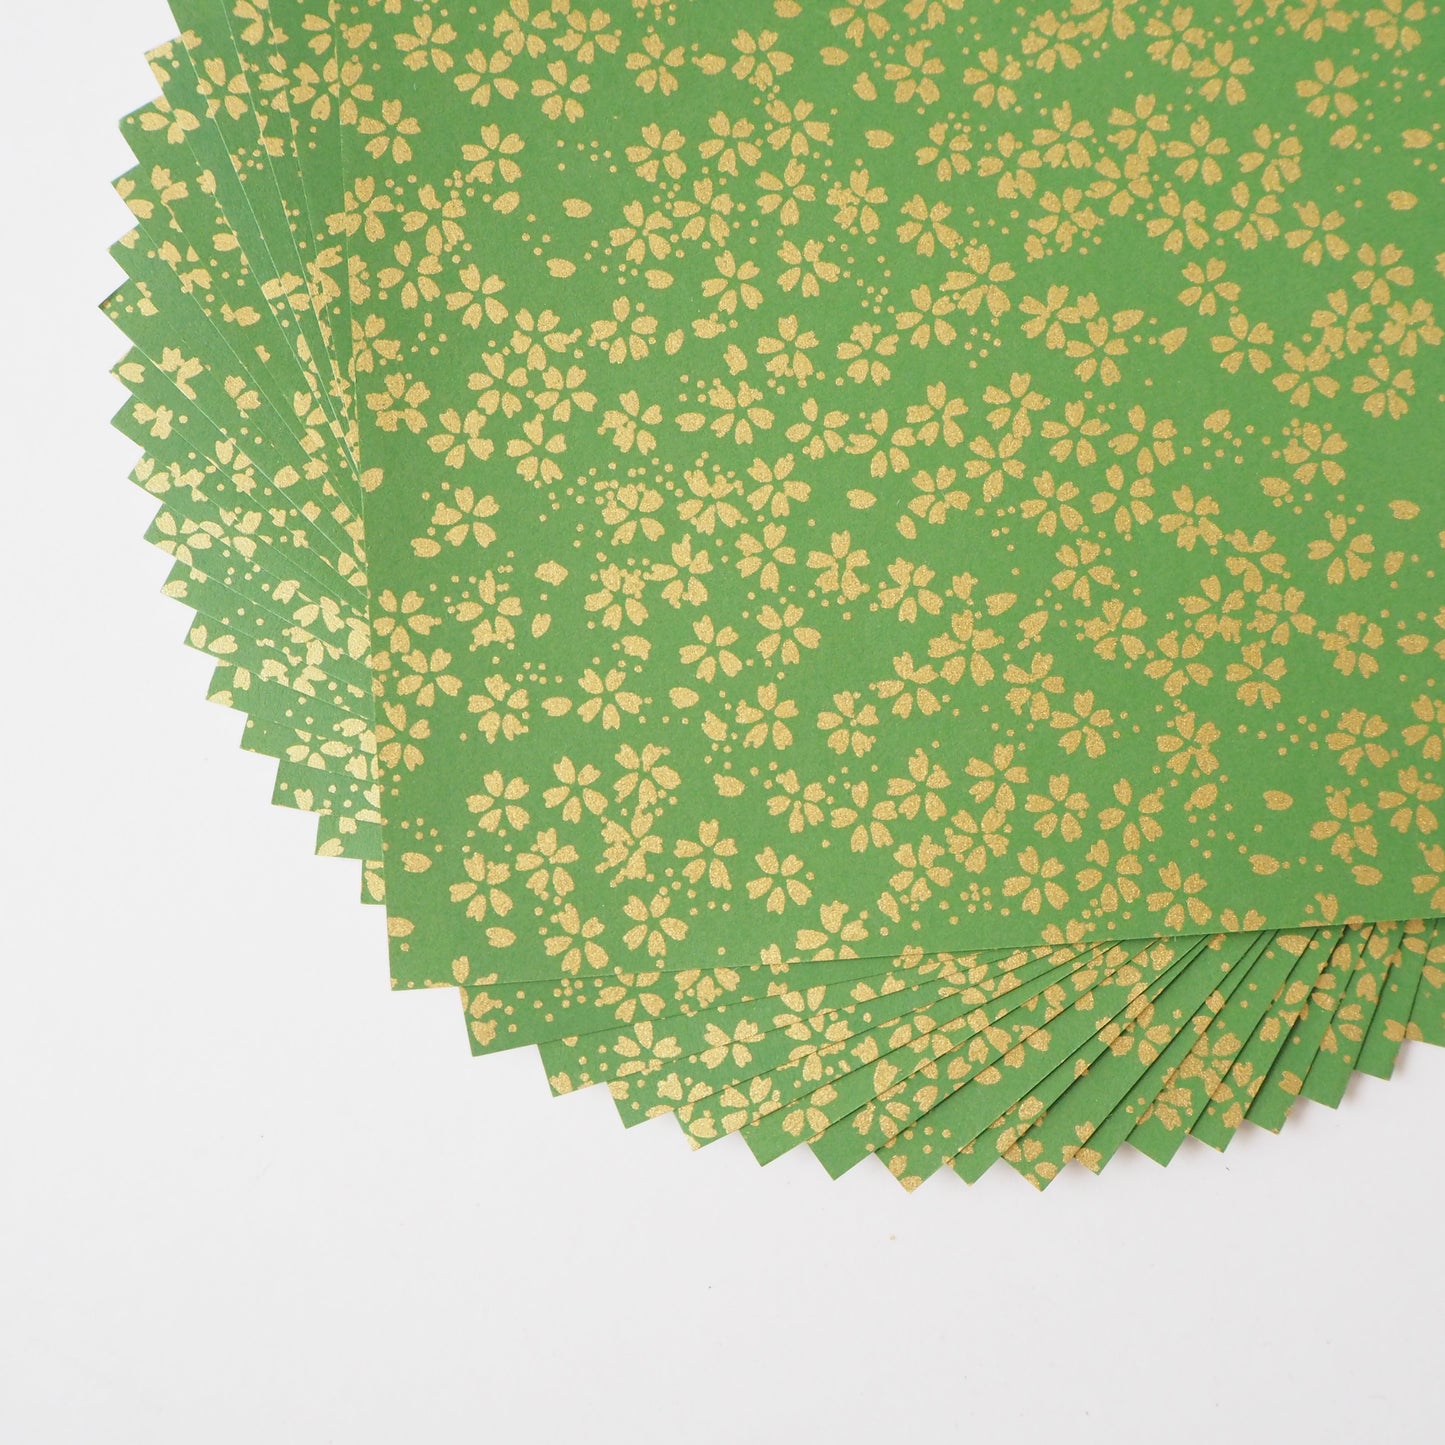 Pack of 20 Sheets 14x14cm Yuzen Washi Origami Paper HZ-166 - Small Gold Cherry Blossom Matcha